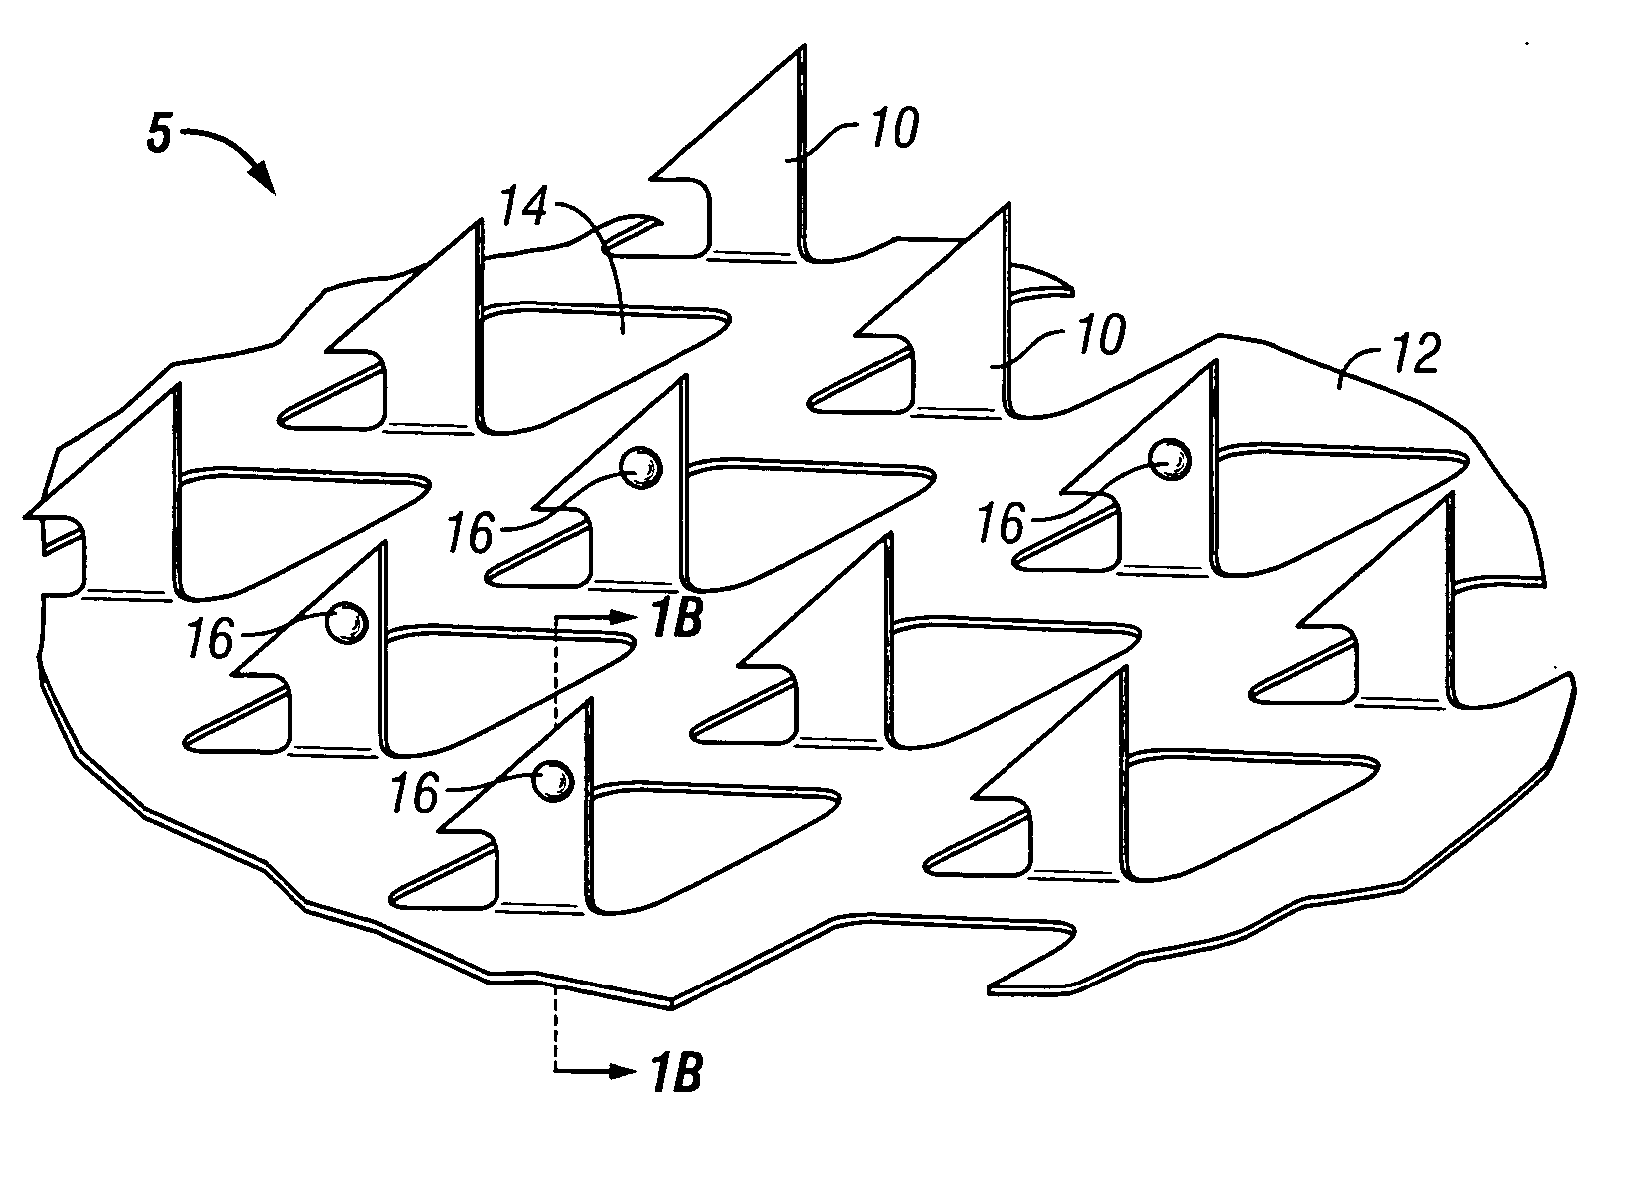 Device and method for intradermal cell implantation